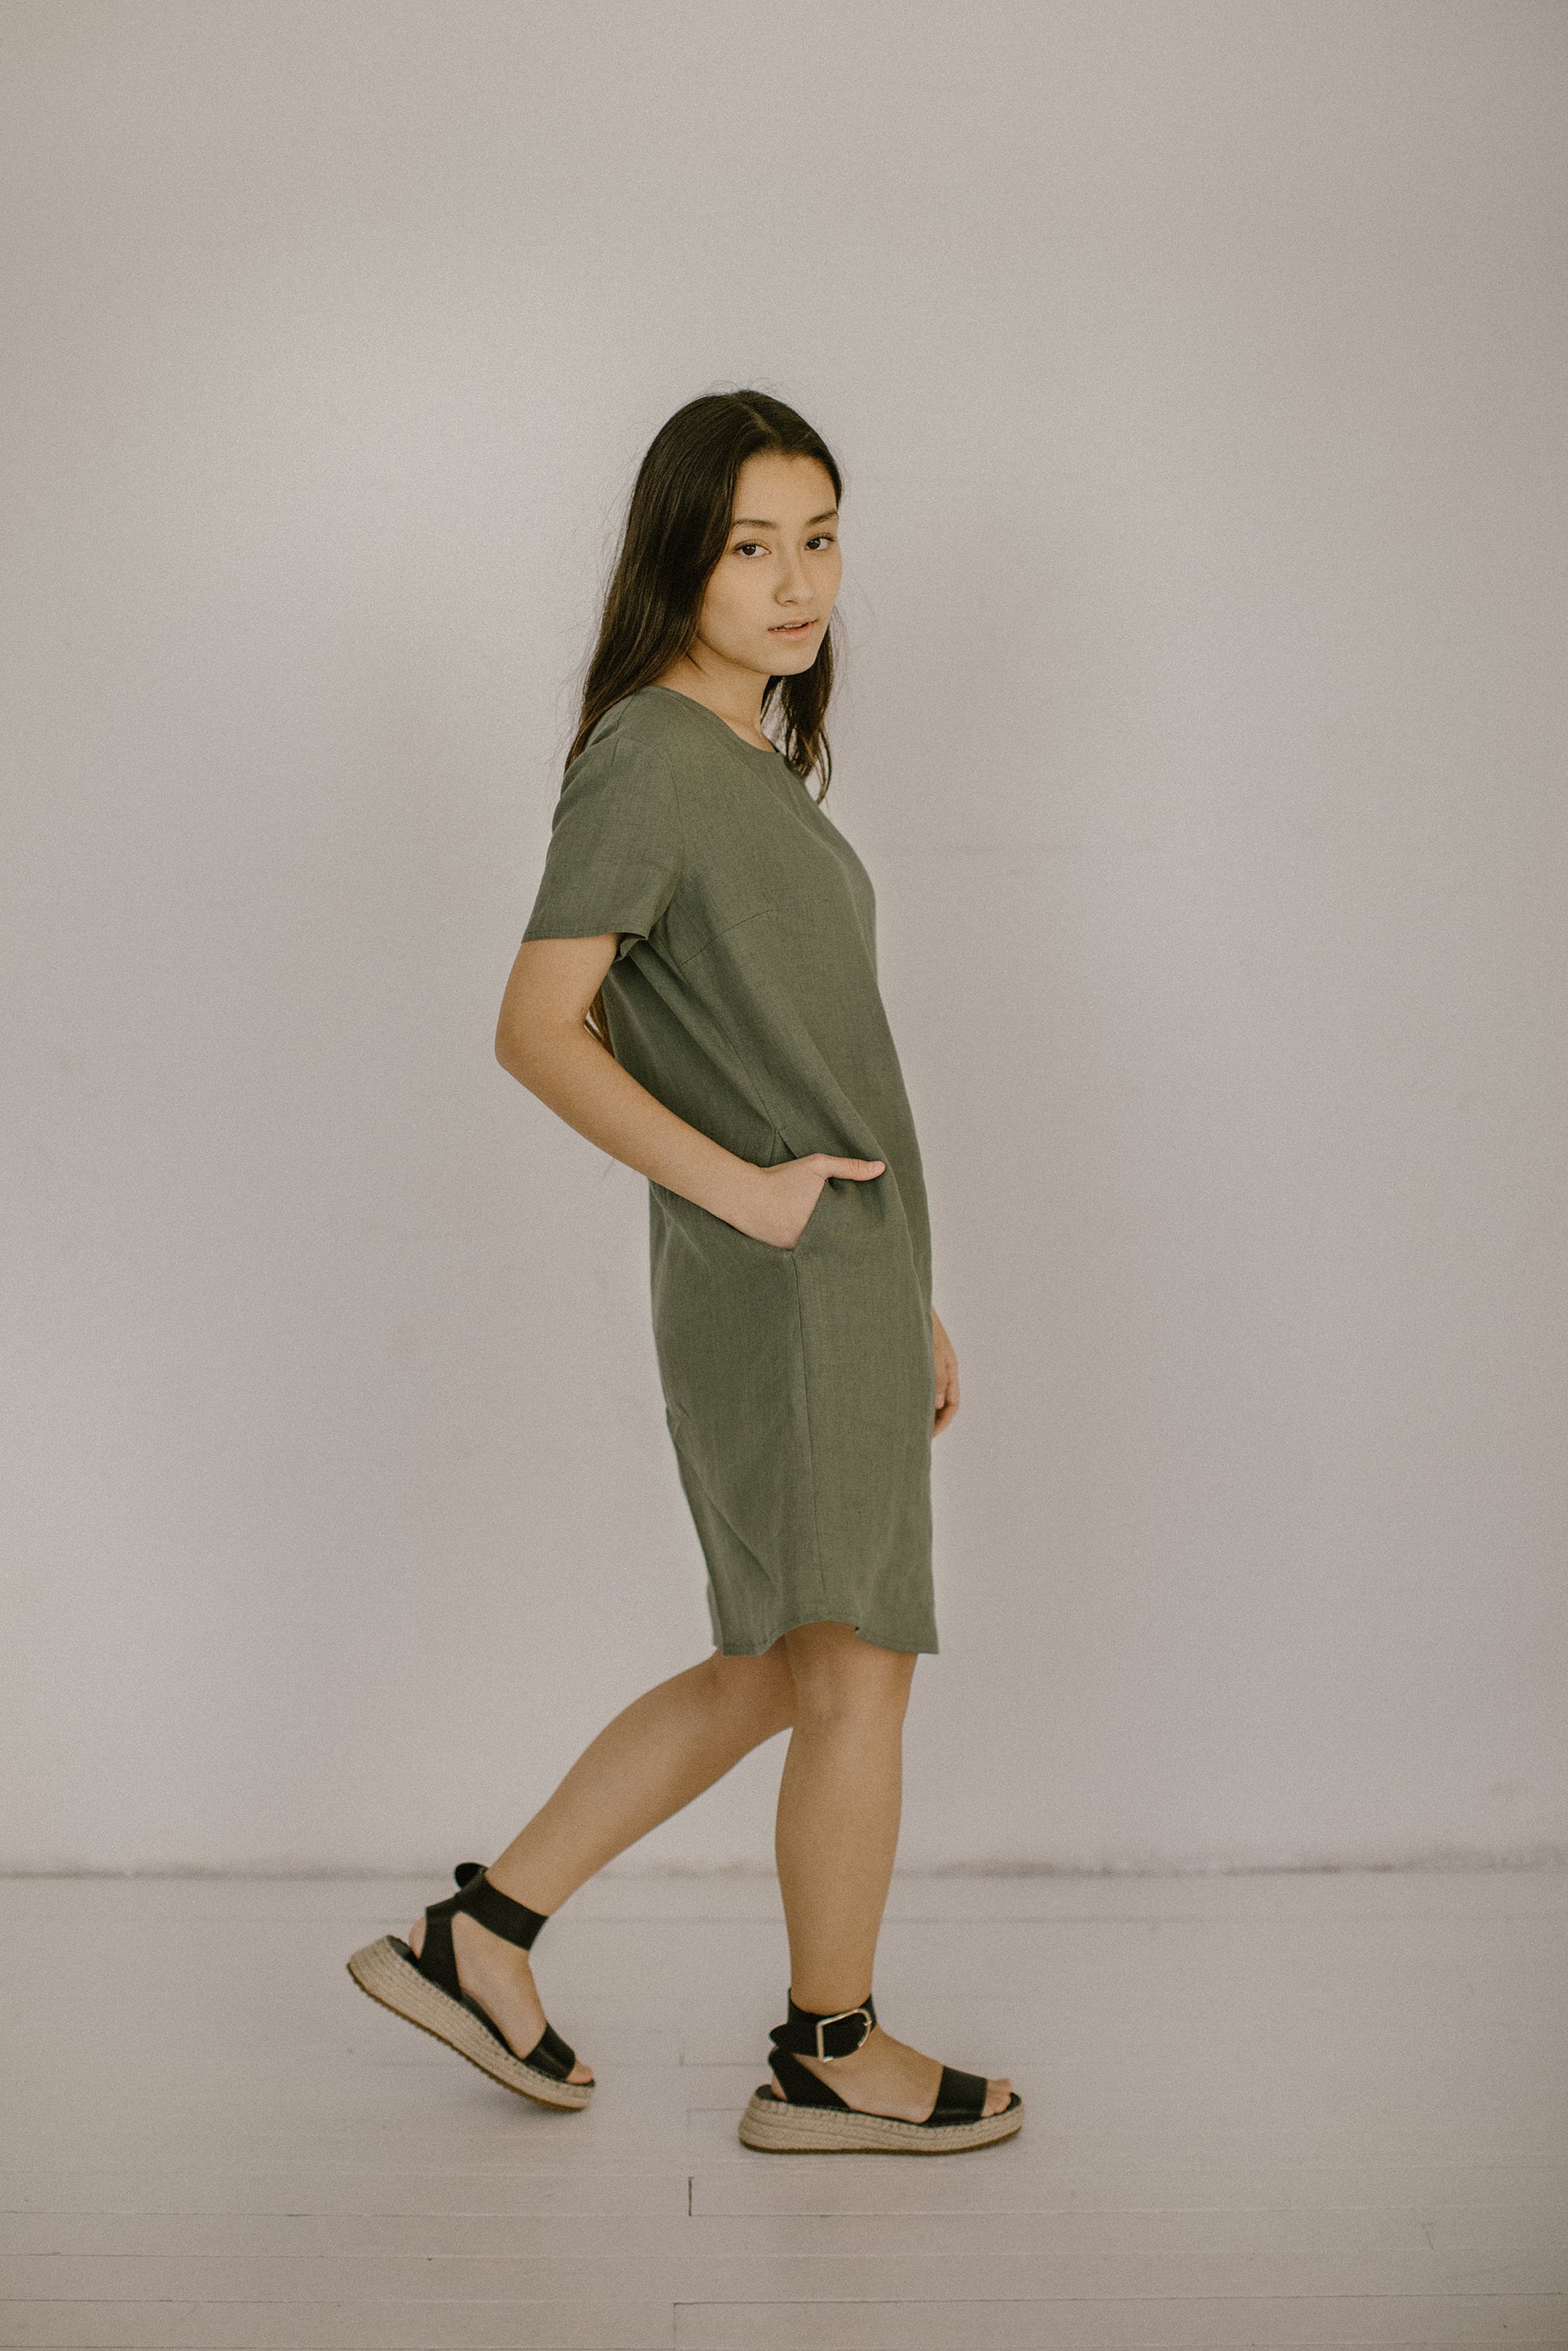 Oversized simple linen dress for summer ALISA, size 34/READY TO SHIP